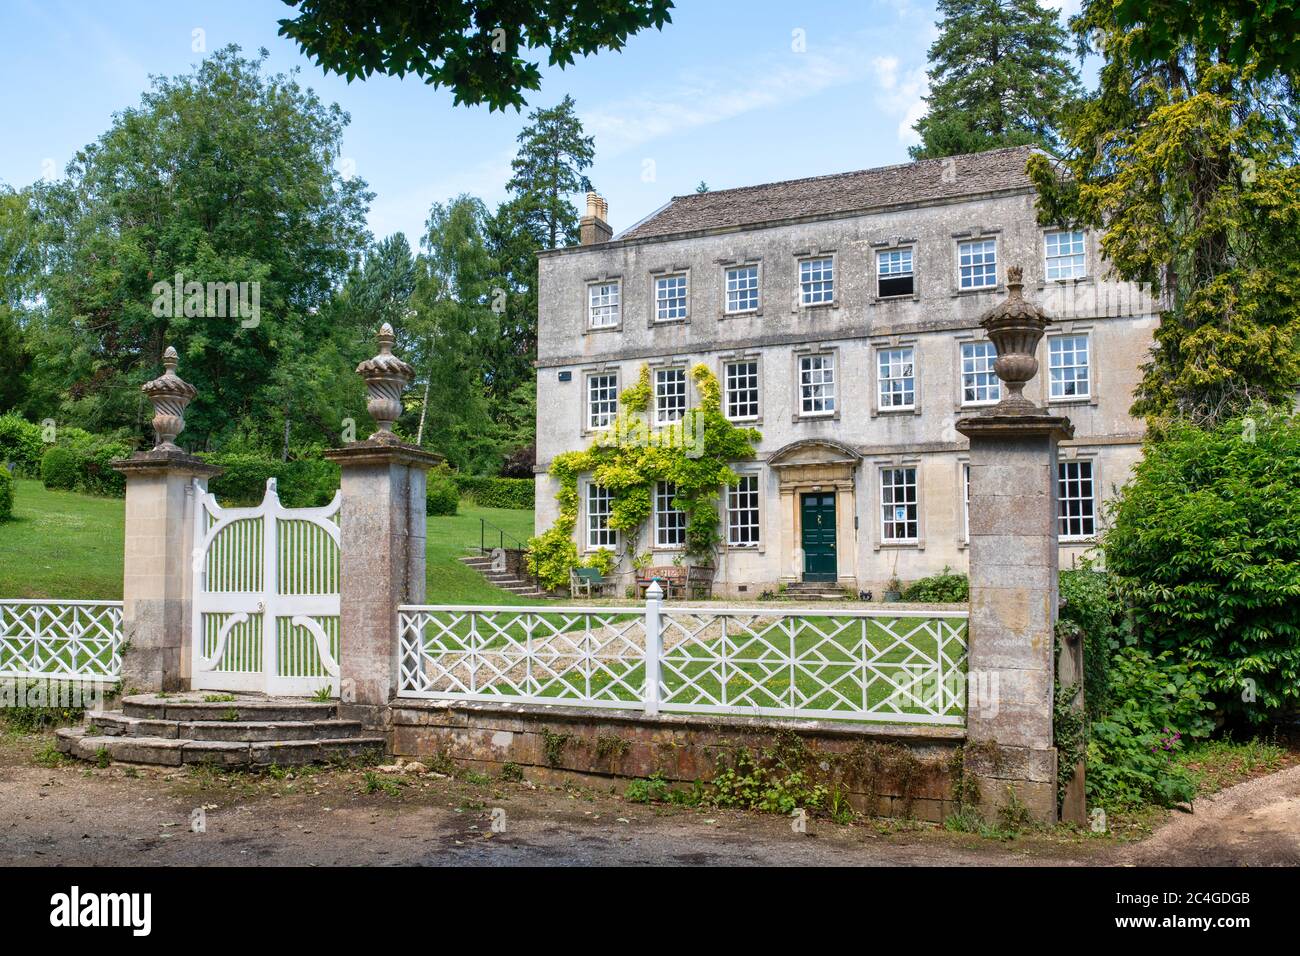 Pitchcombe House. Pitchcombe, Cotswolds, Gloucestershire, England Stock Photo